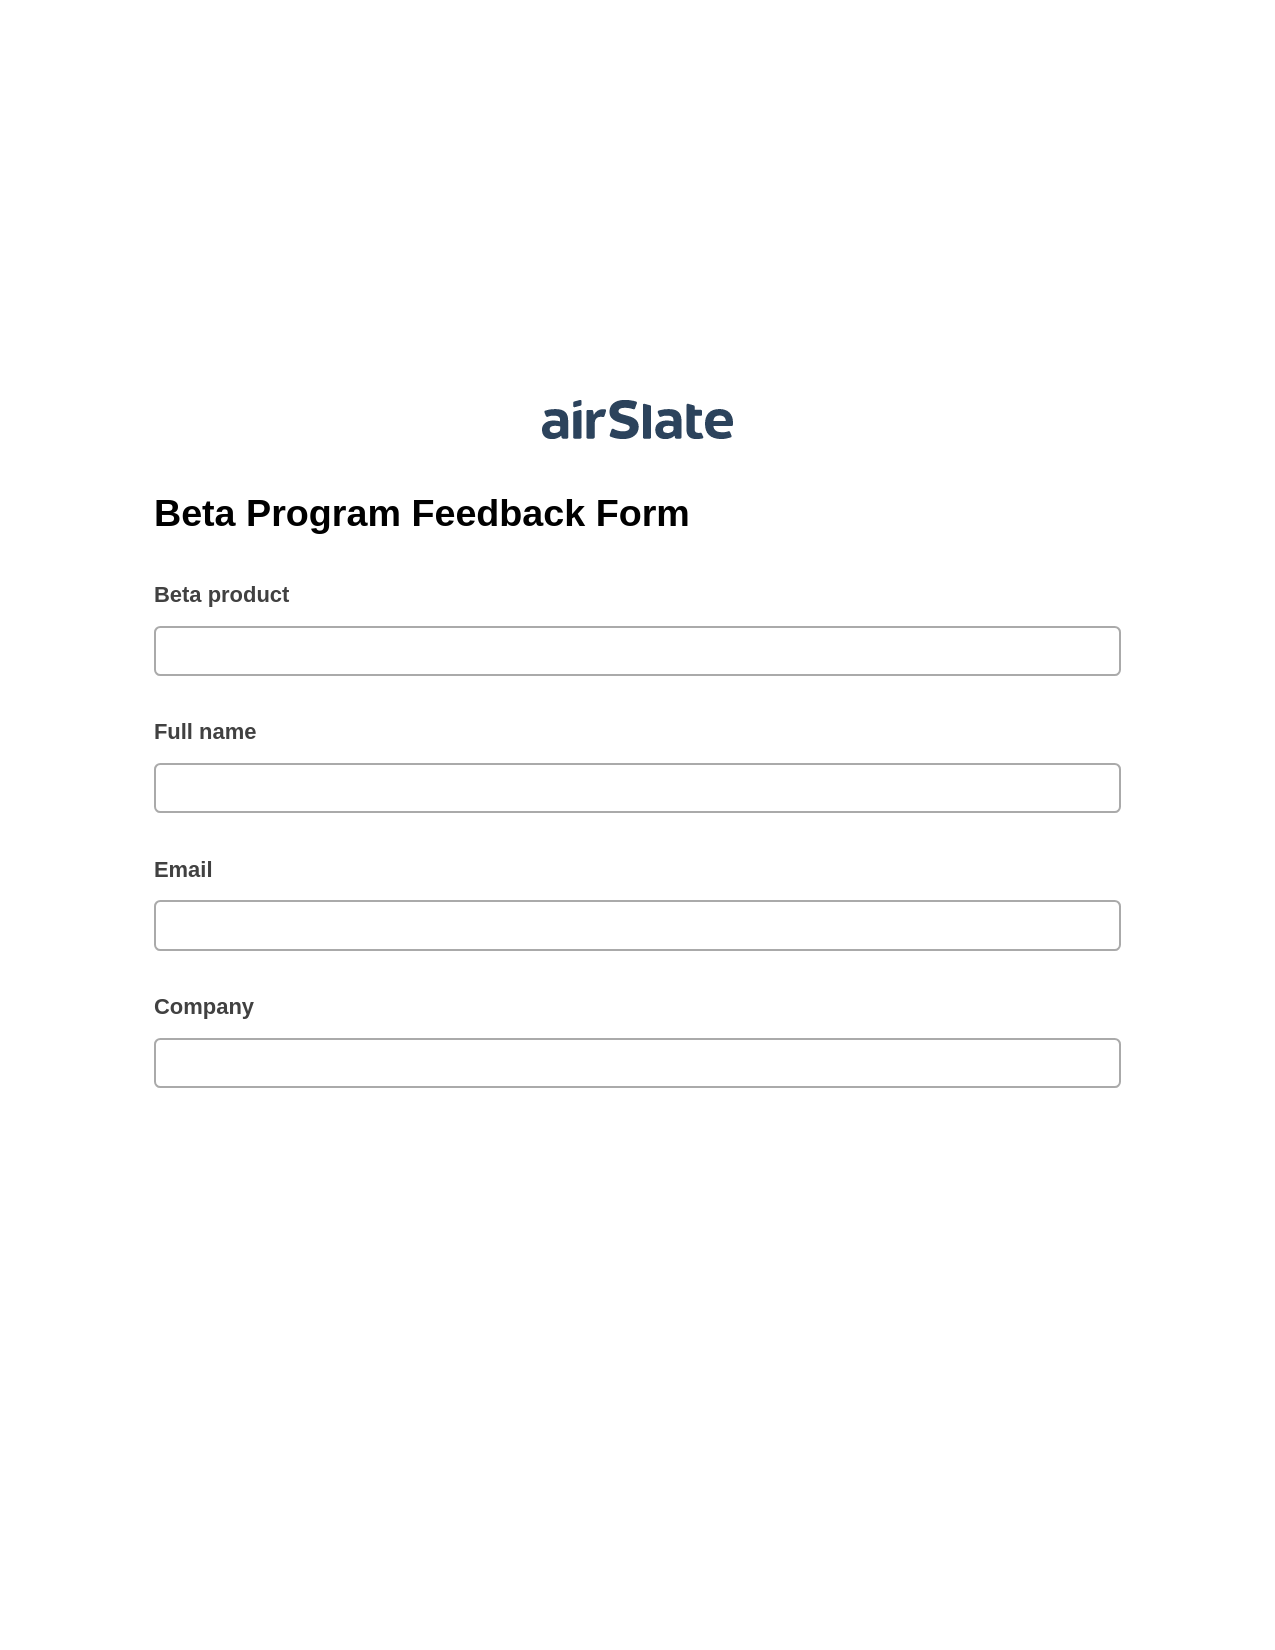 Beta Program Feedback Form Pre-fill from CSV File Bot, Send a Slate with Roles Bot, Box Bot